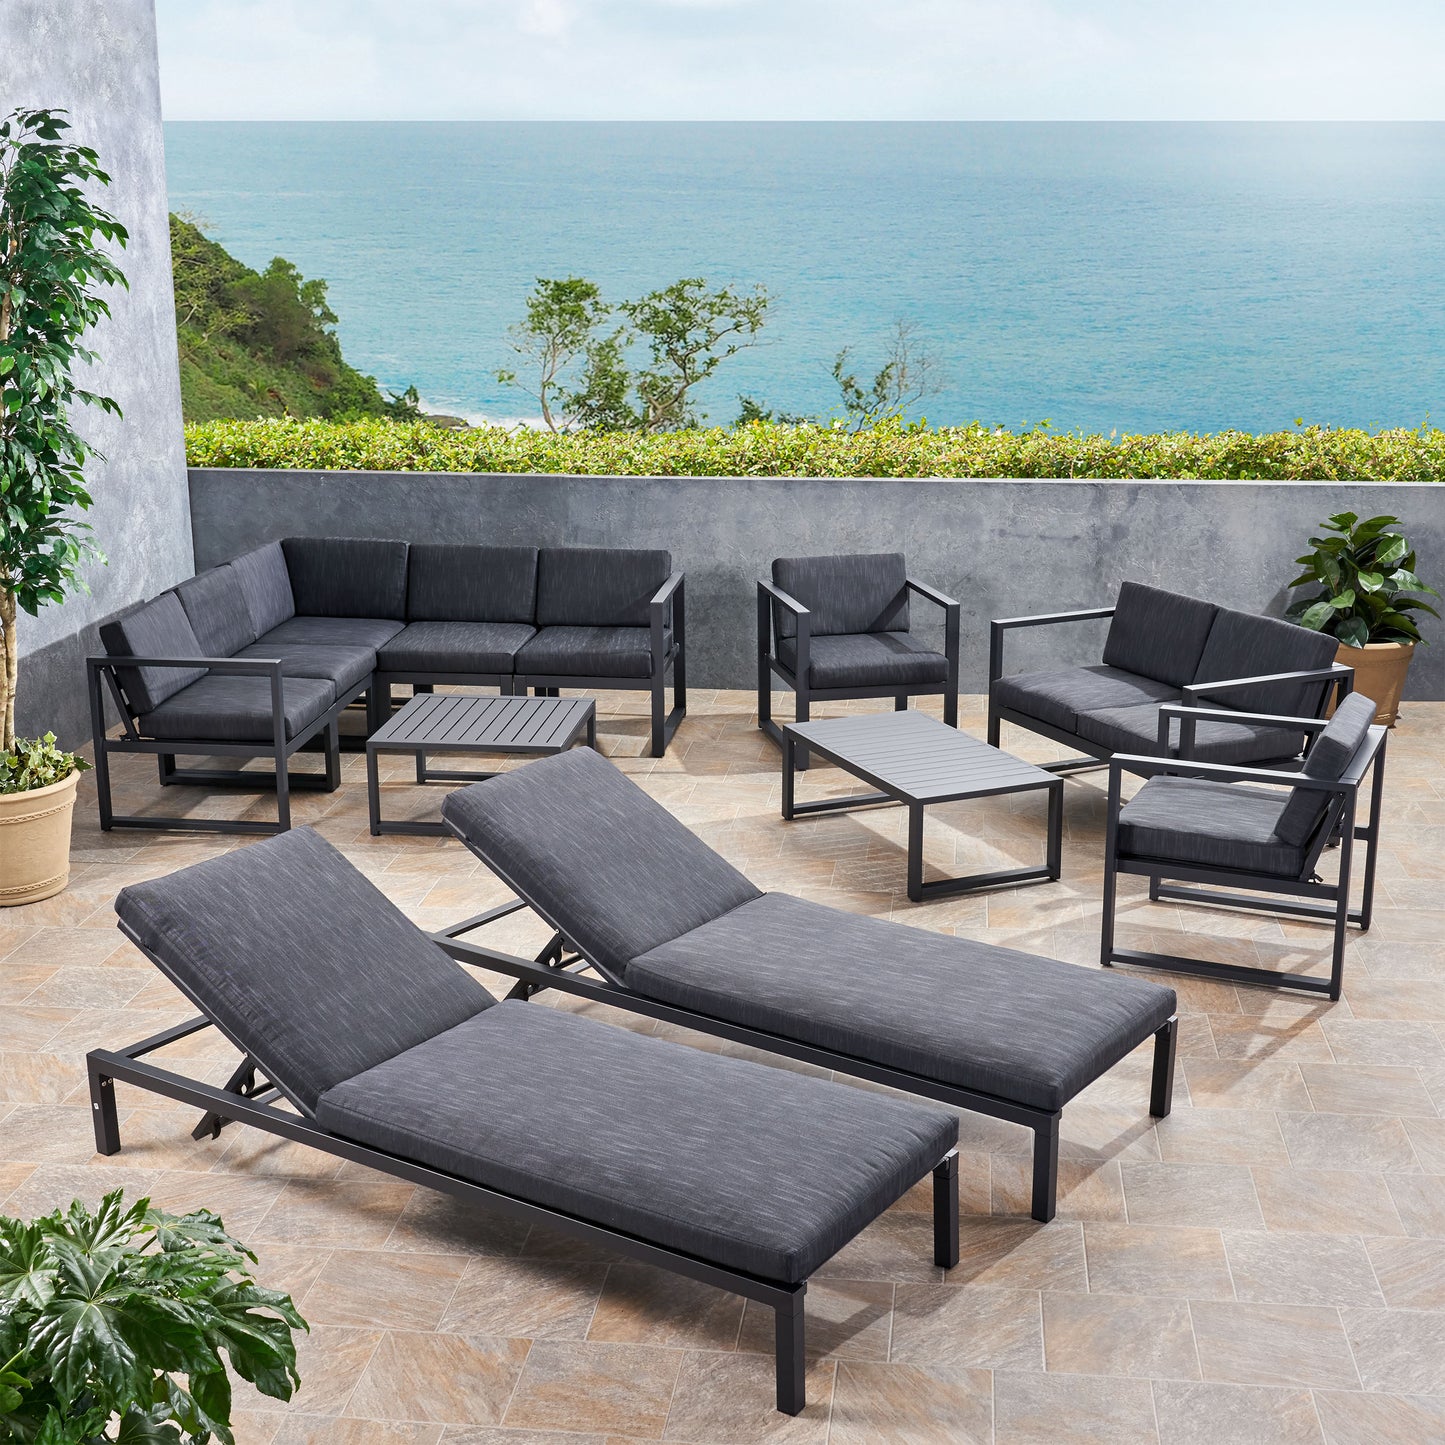 Nealie Outdoor 9 Seater Aluminum Sectional Sofa Set with Mesh Chaise Lounges